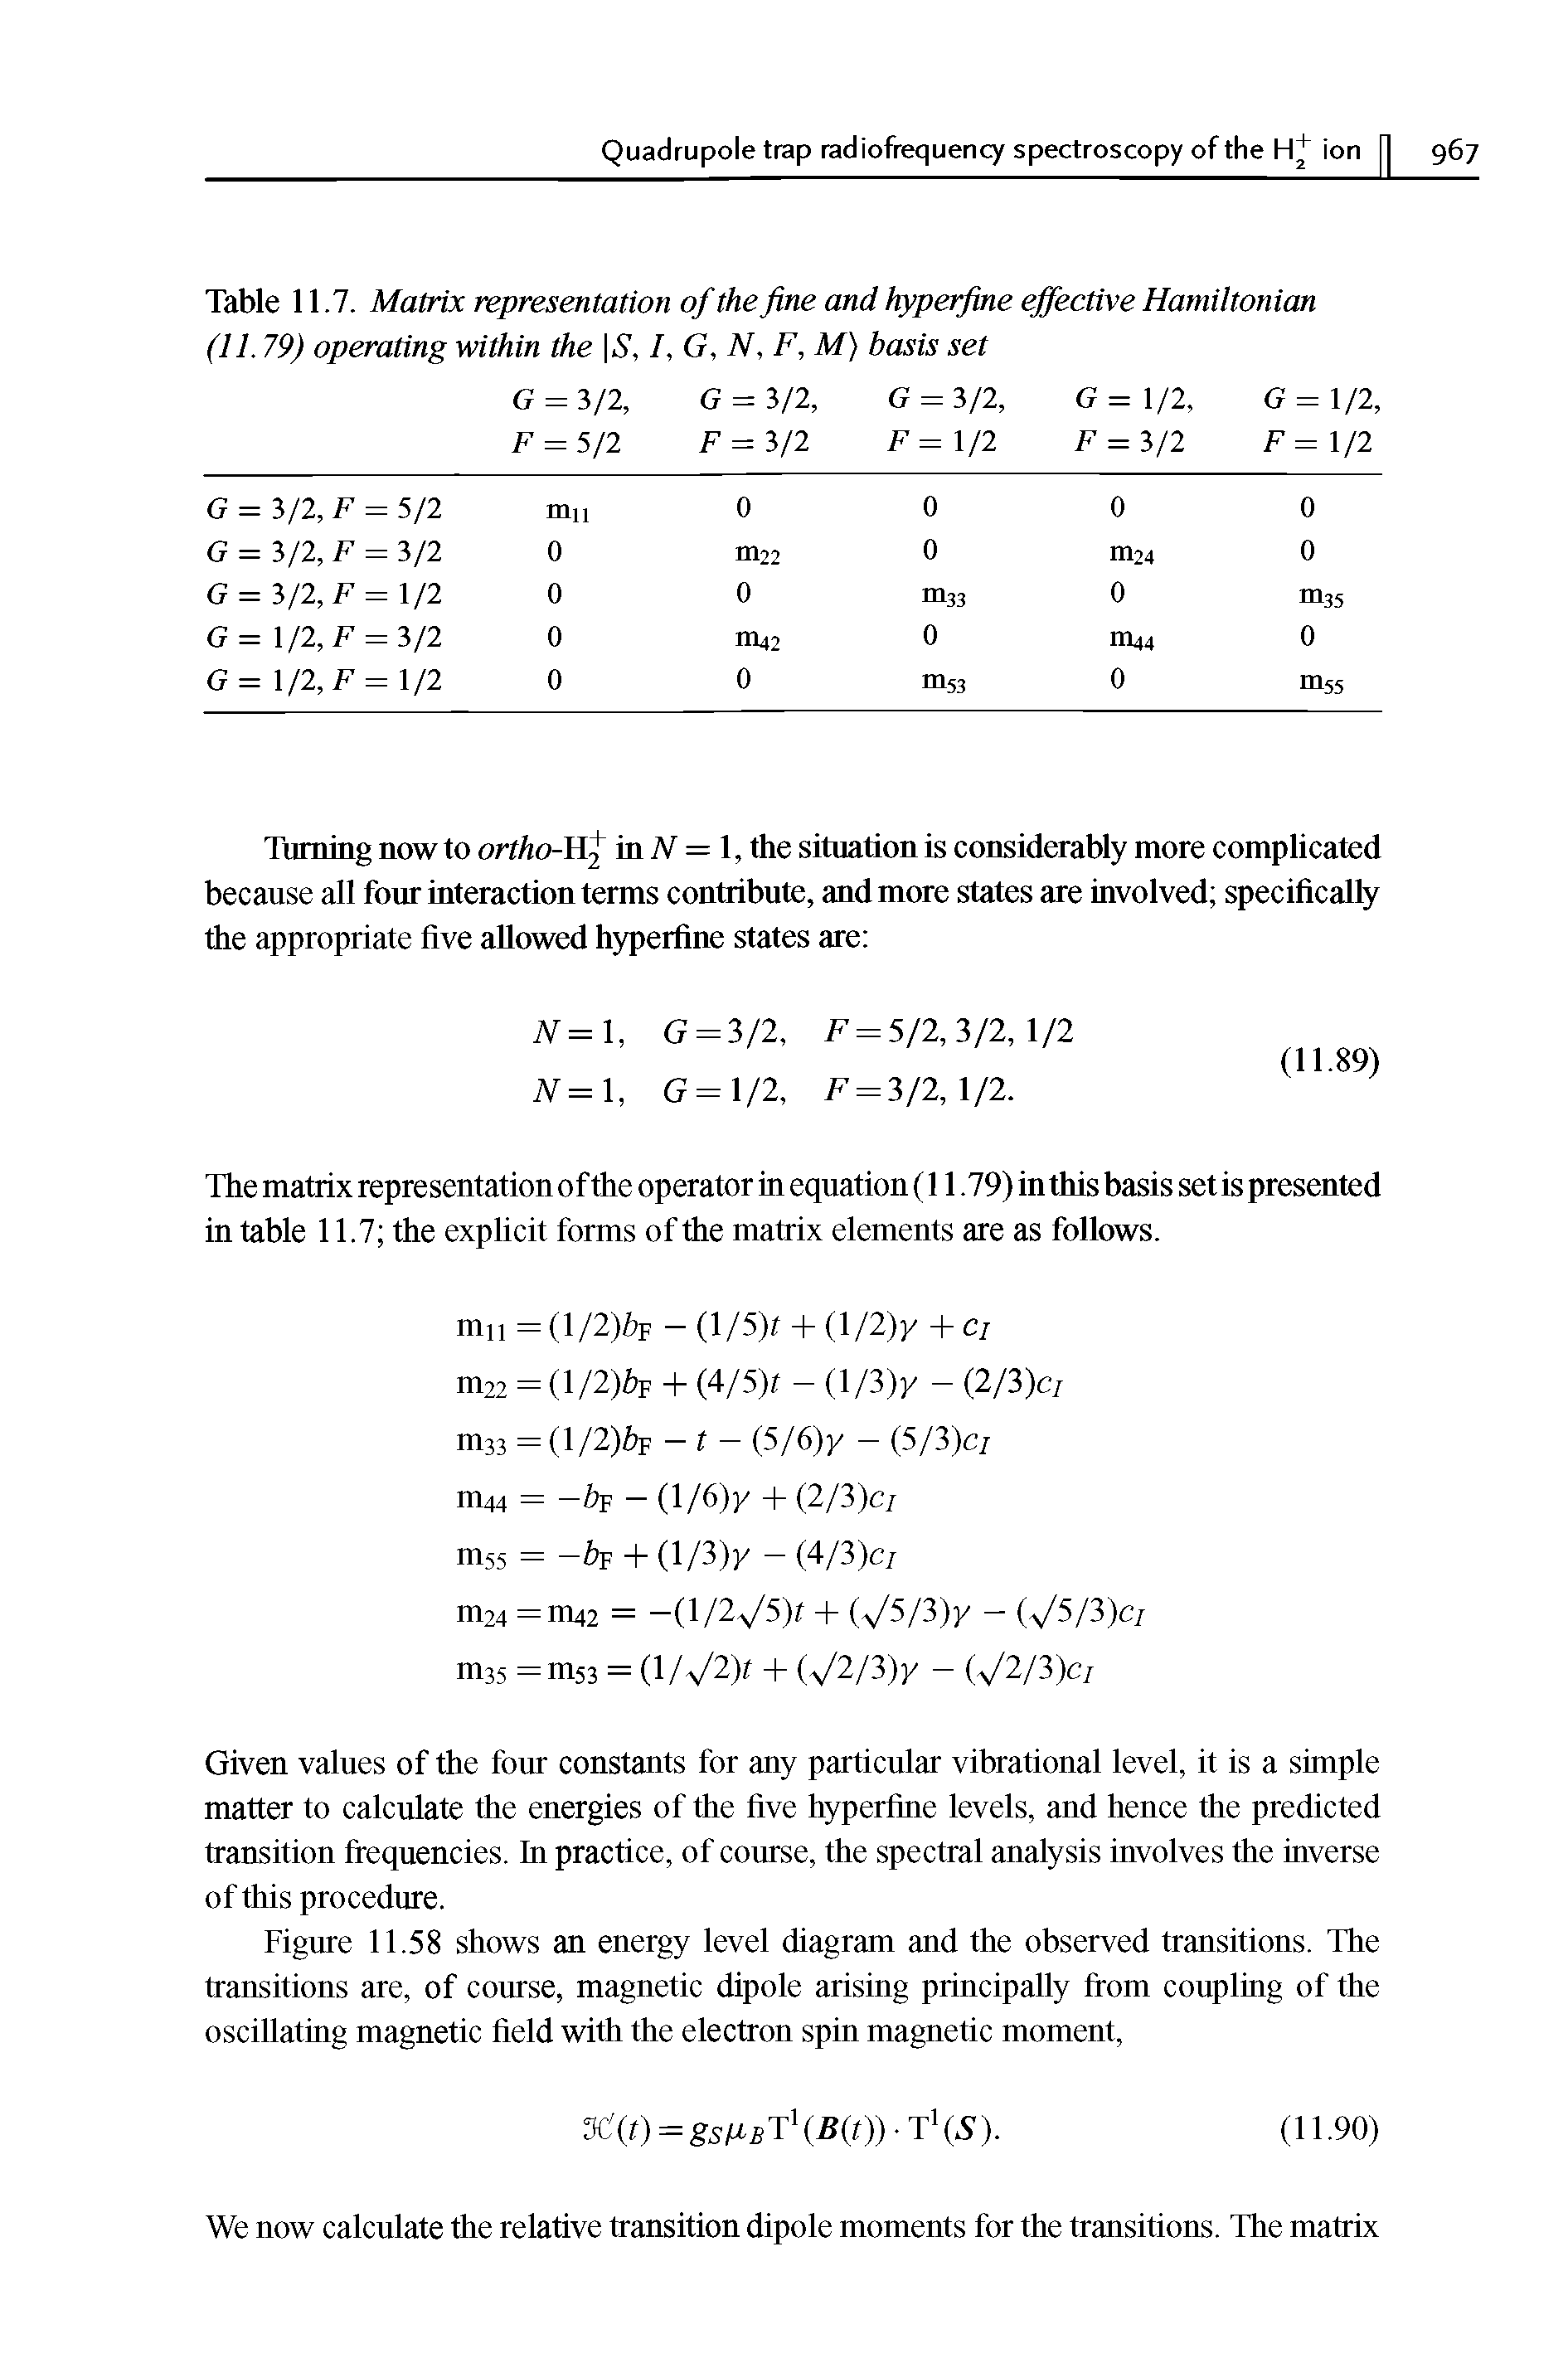 Table 11.7. Matrix representation of the fine and hyperfine effective Hamiltonian (11.79) operating within the IG, /, G, N, F, M) basis set...